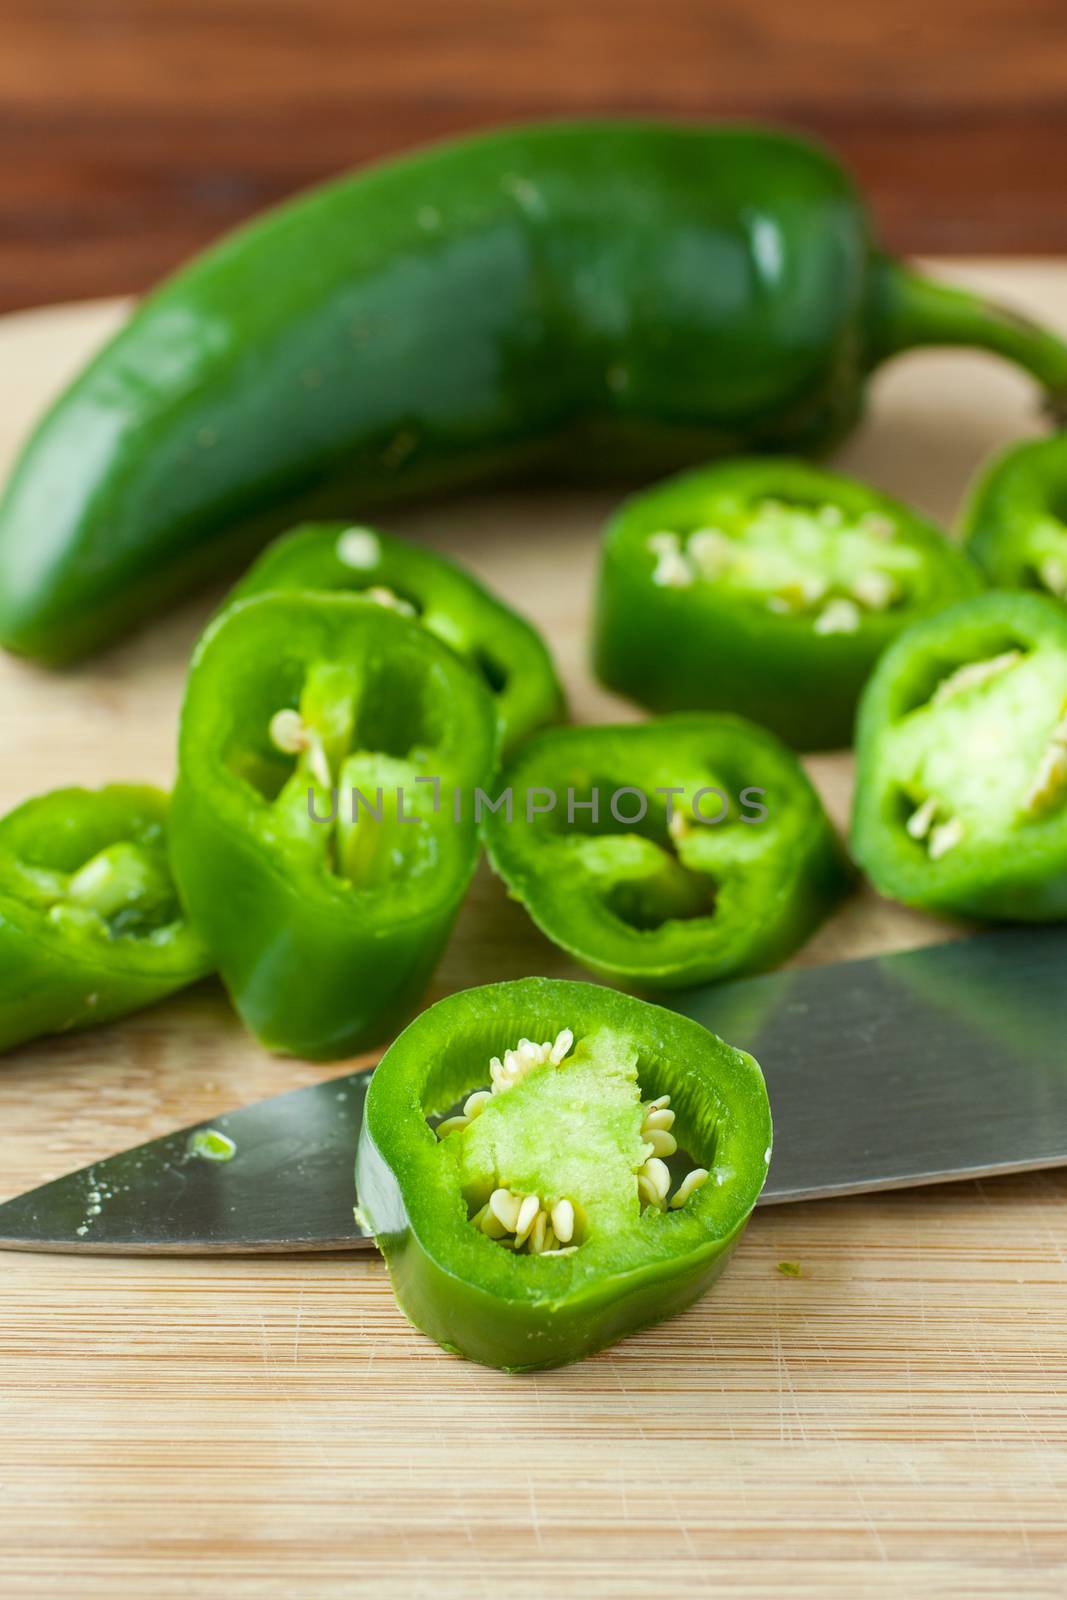 Sliced jalapeno peppers on a bamboo cutting board.